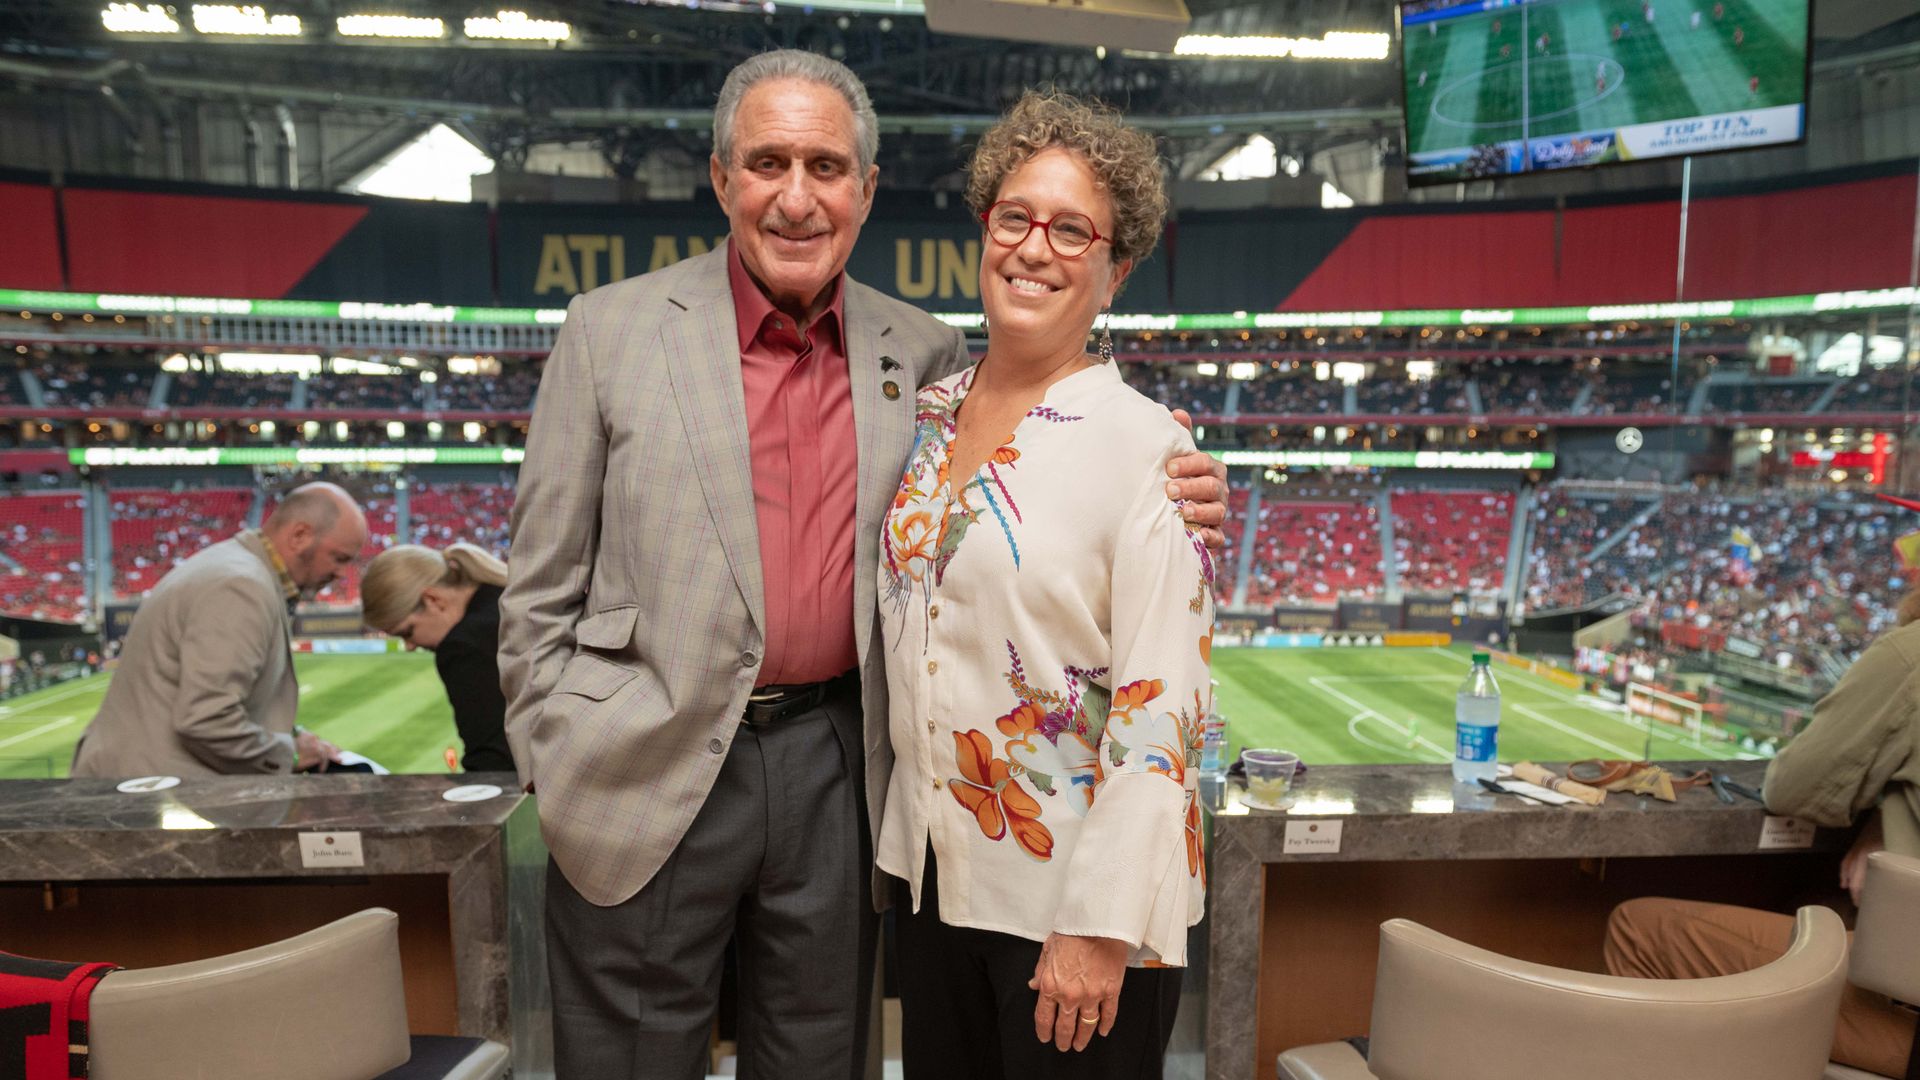 Arthur Blank and Fay Twersky stand together at a sports event smiling